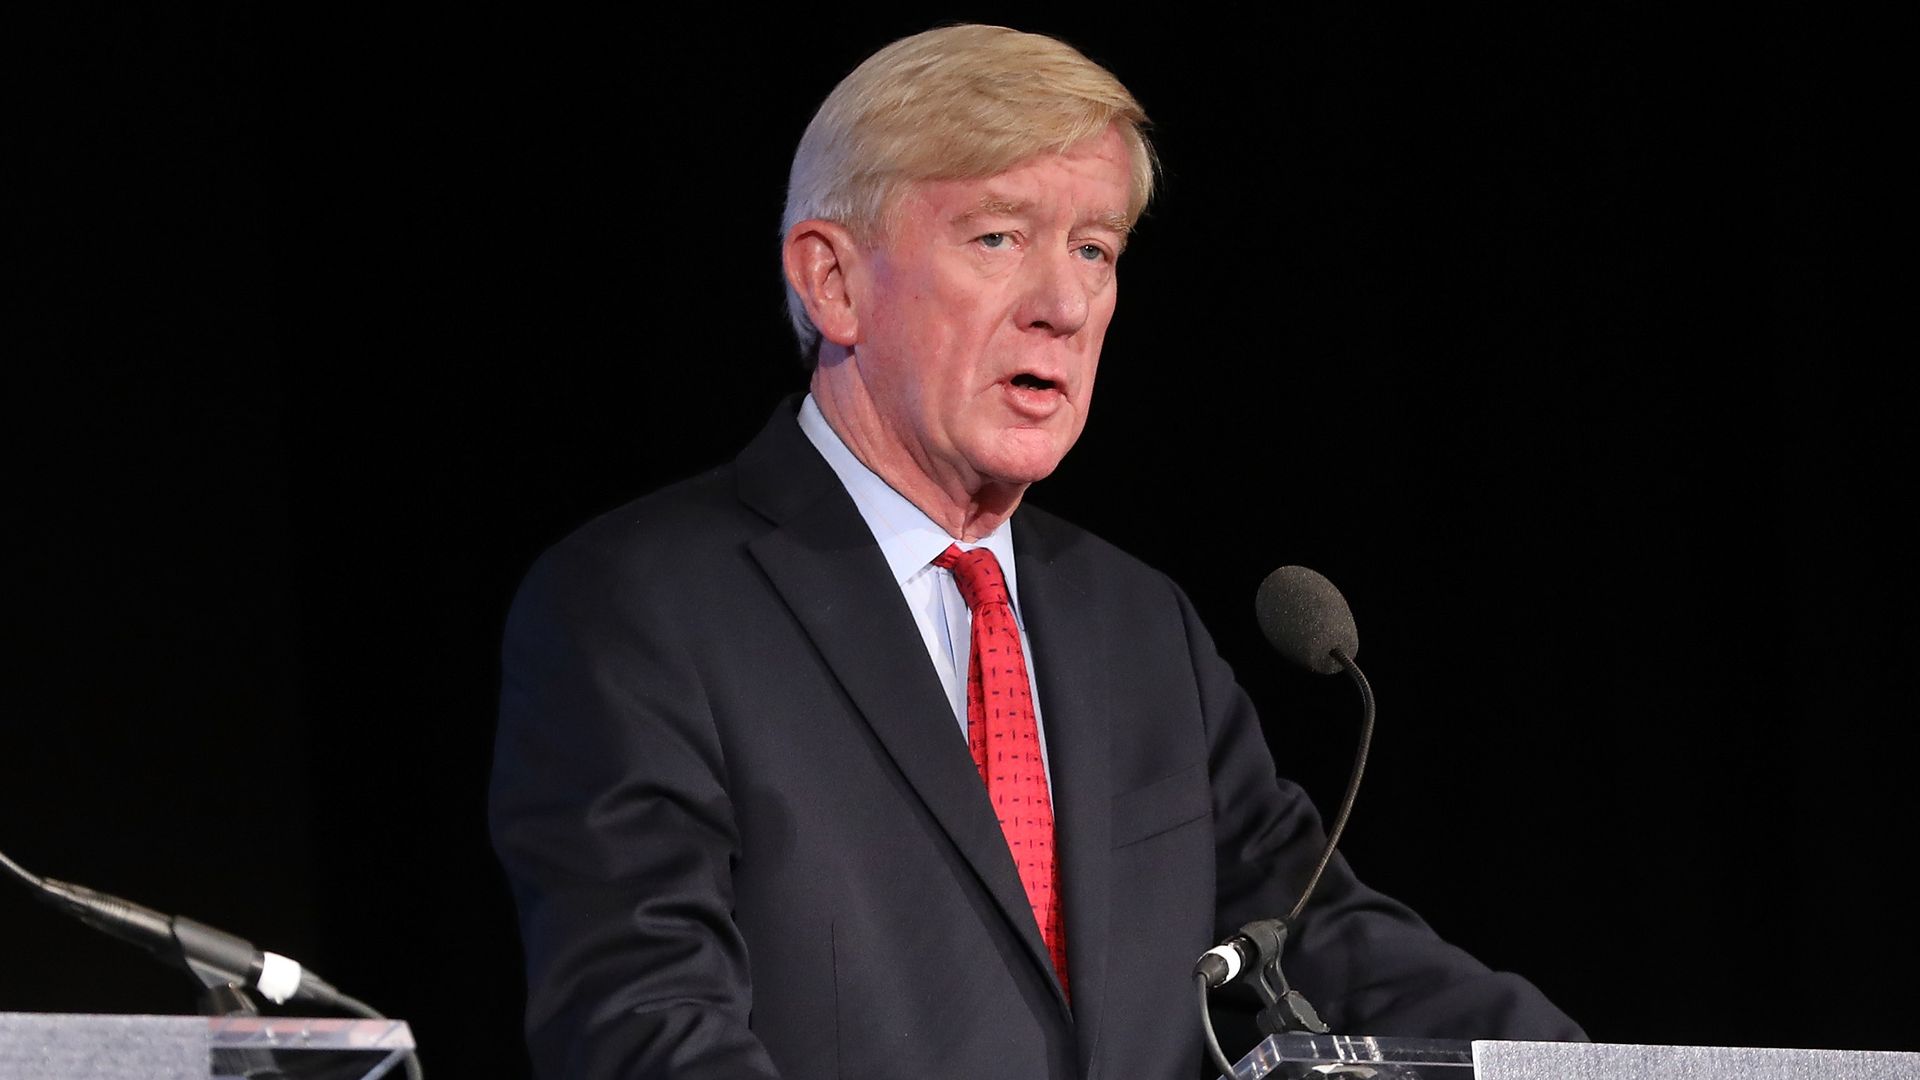 weld standing at a podium.